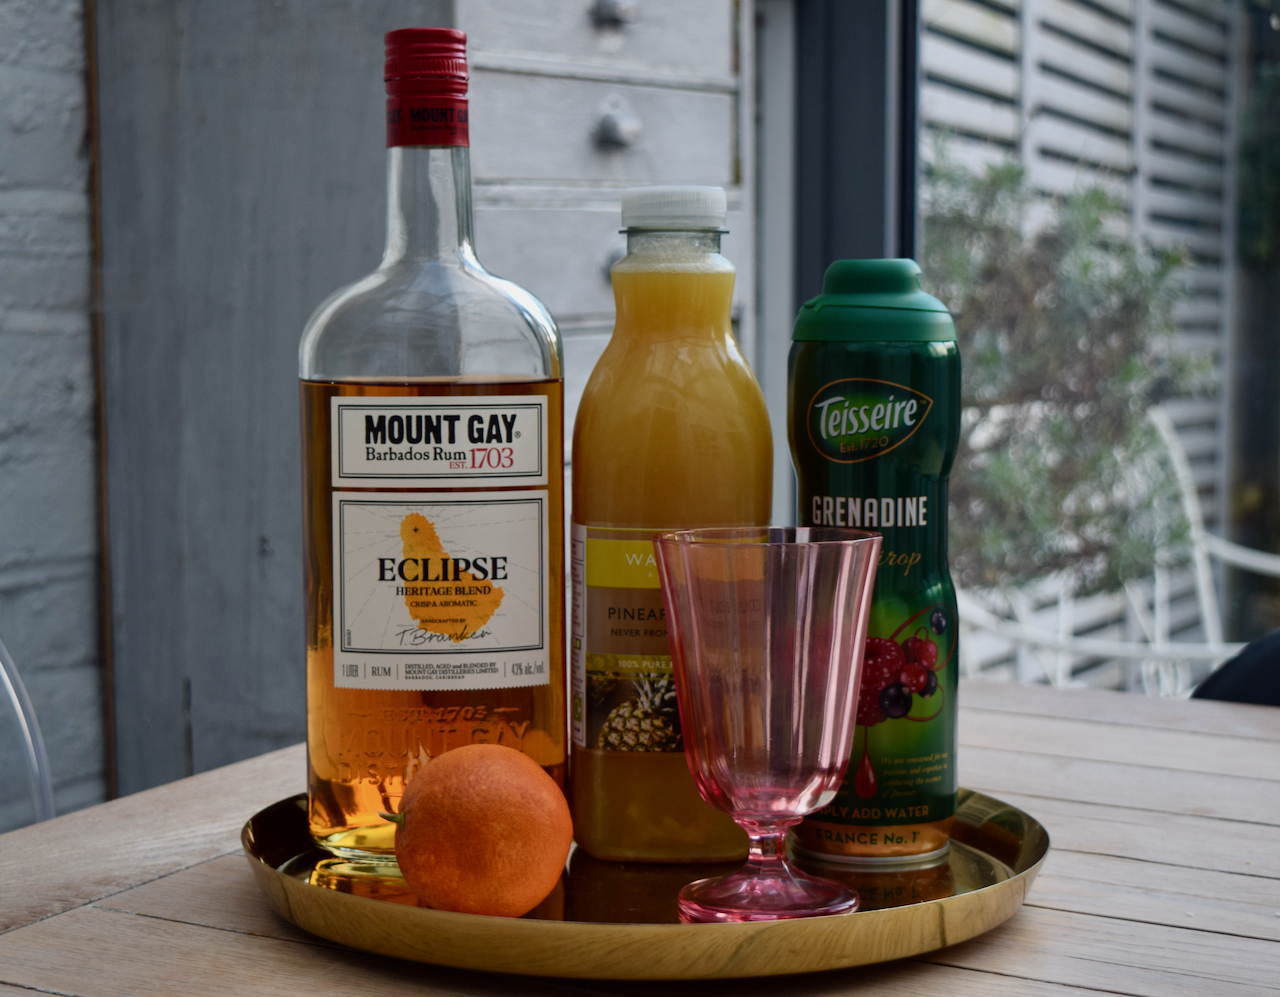 Blood Orange Rum Punch recipe from Lucy Loves Food Blog